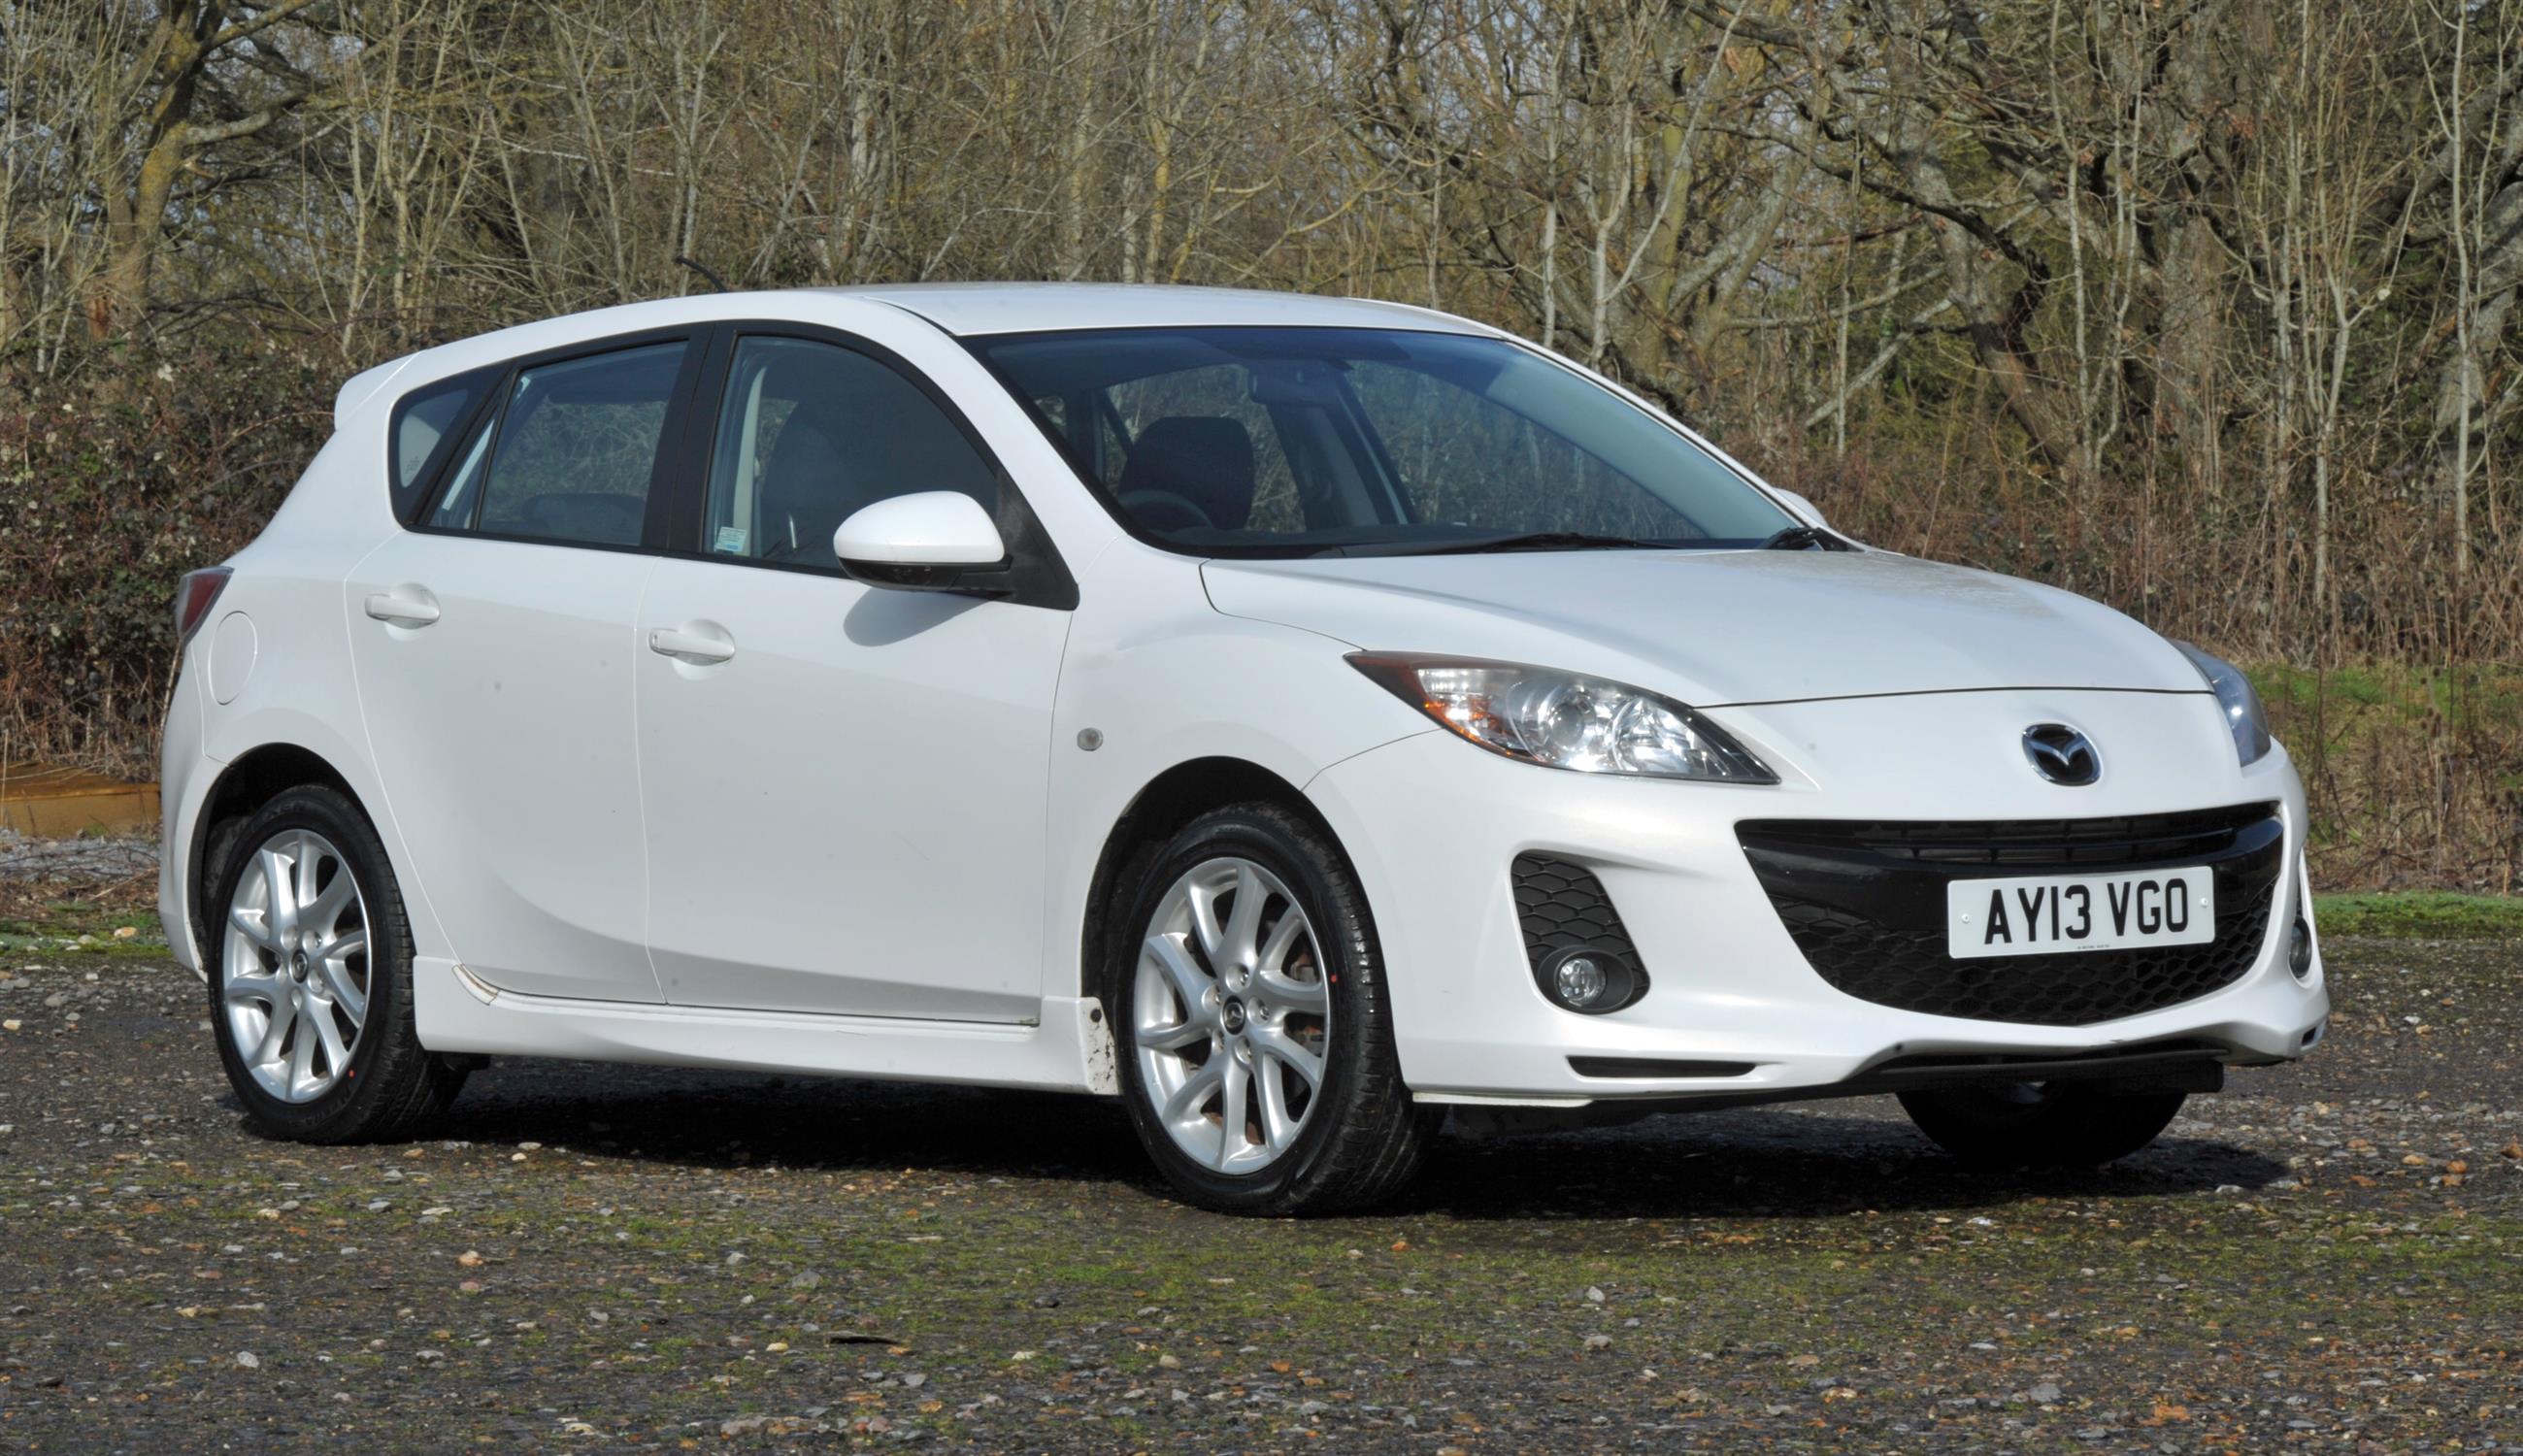 Mazda 3 1.6 Tamura Petrol Automatic, Registration number: AY13 VGO. Genuine 17,827 miles from new.